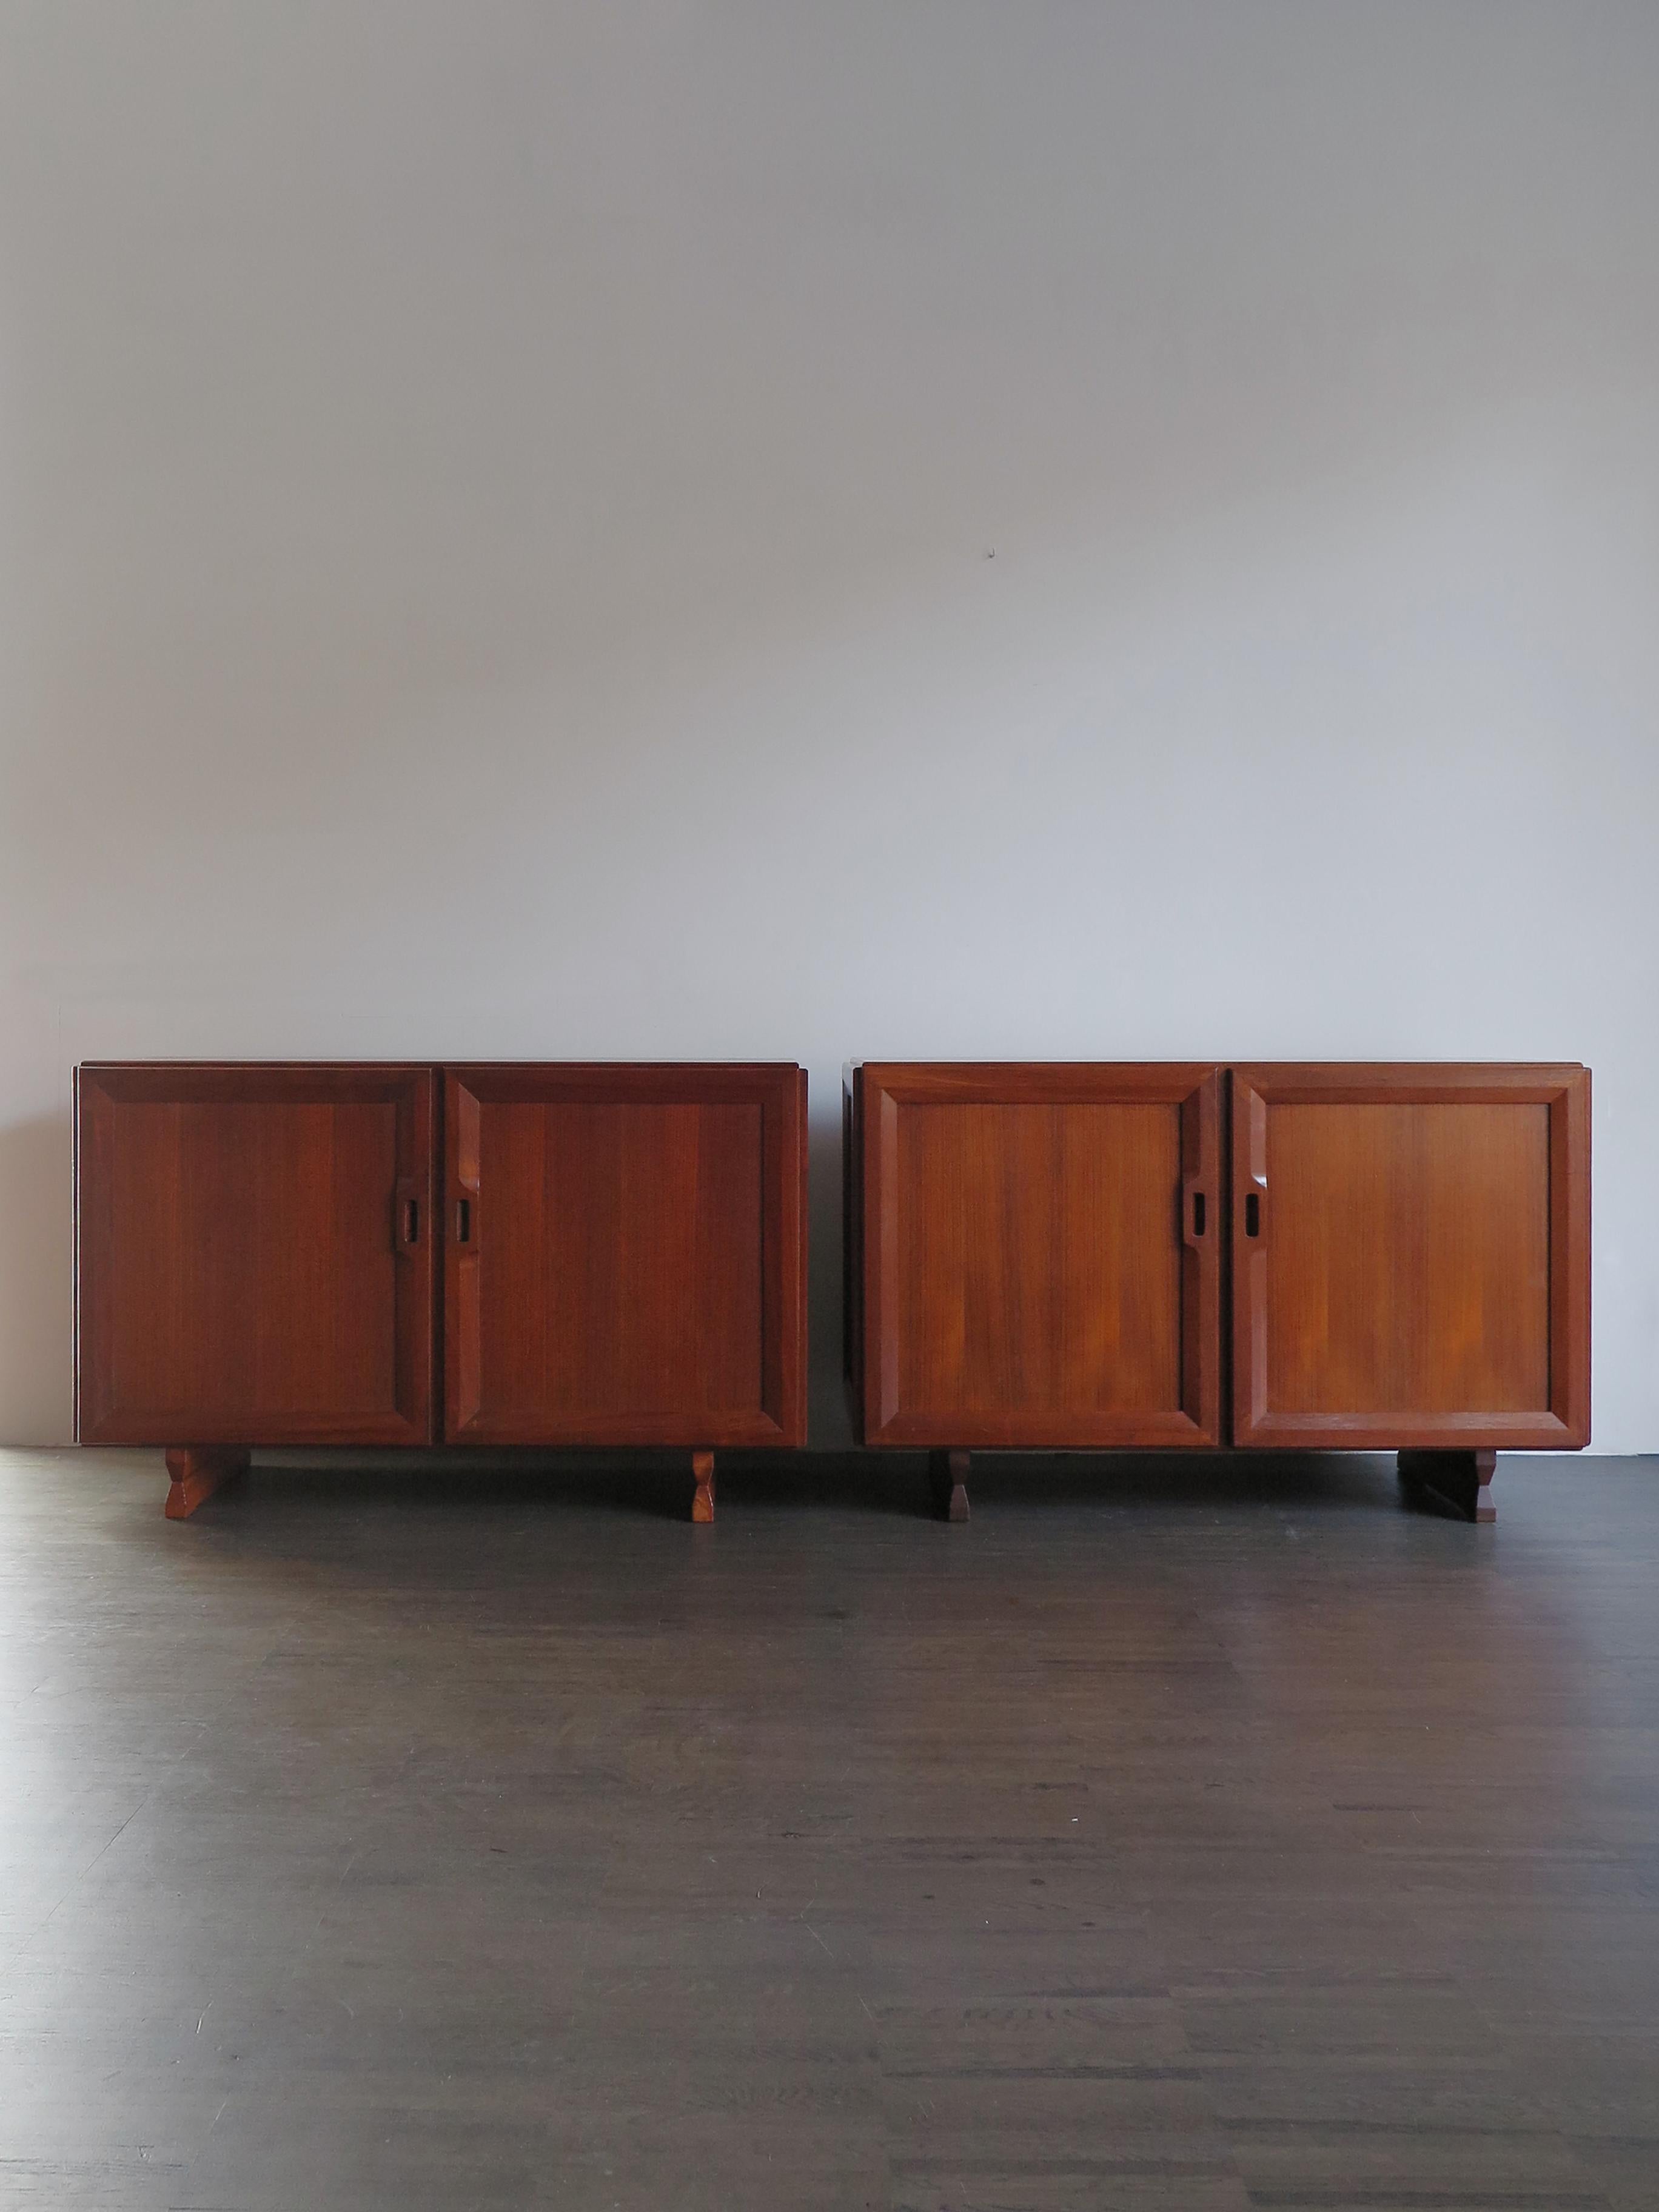 Italian couple of wood sideboards model MB15 designed by Franco Albini and produced by Poggi Pavia,
two-door models with wood veneer, feet, door frames and details in solid wood, 1950s

Bibliography:
G. Gramigna, Italian Design 1950 - 2000, Vol